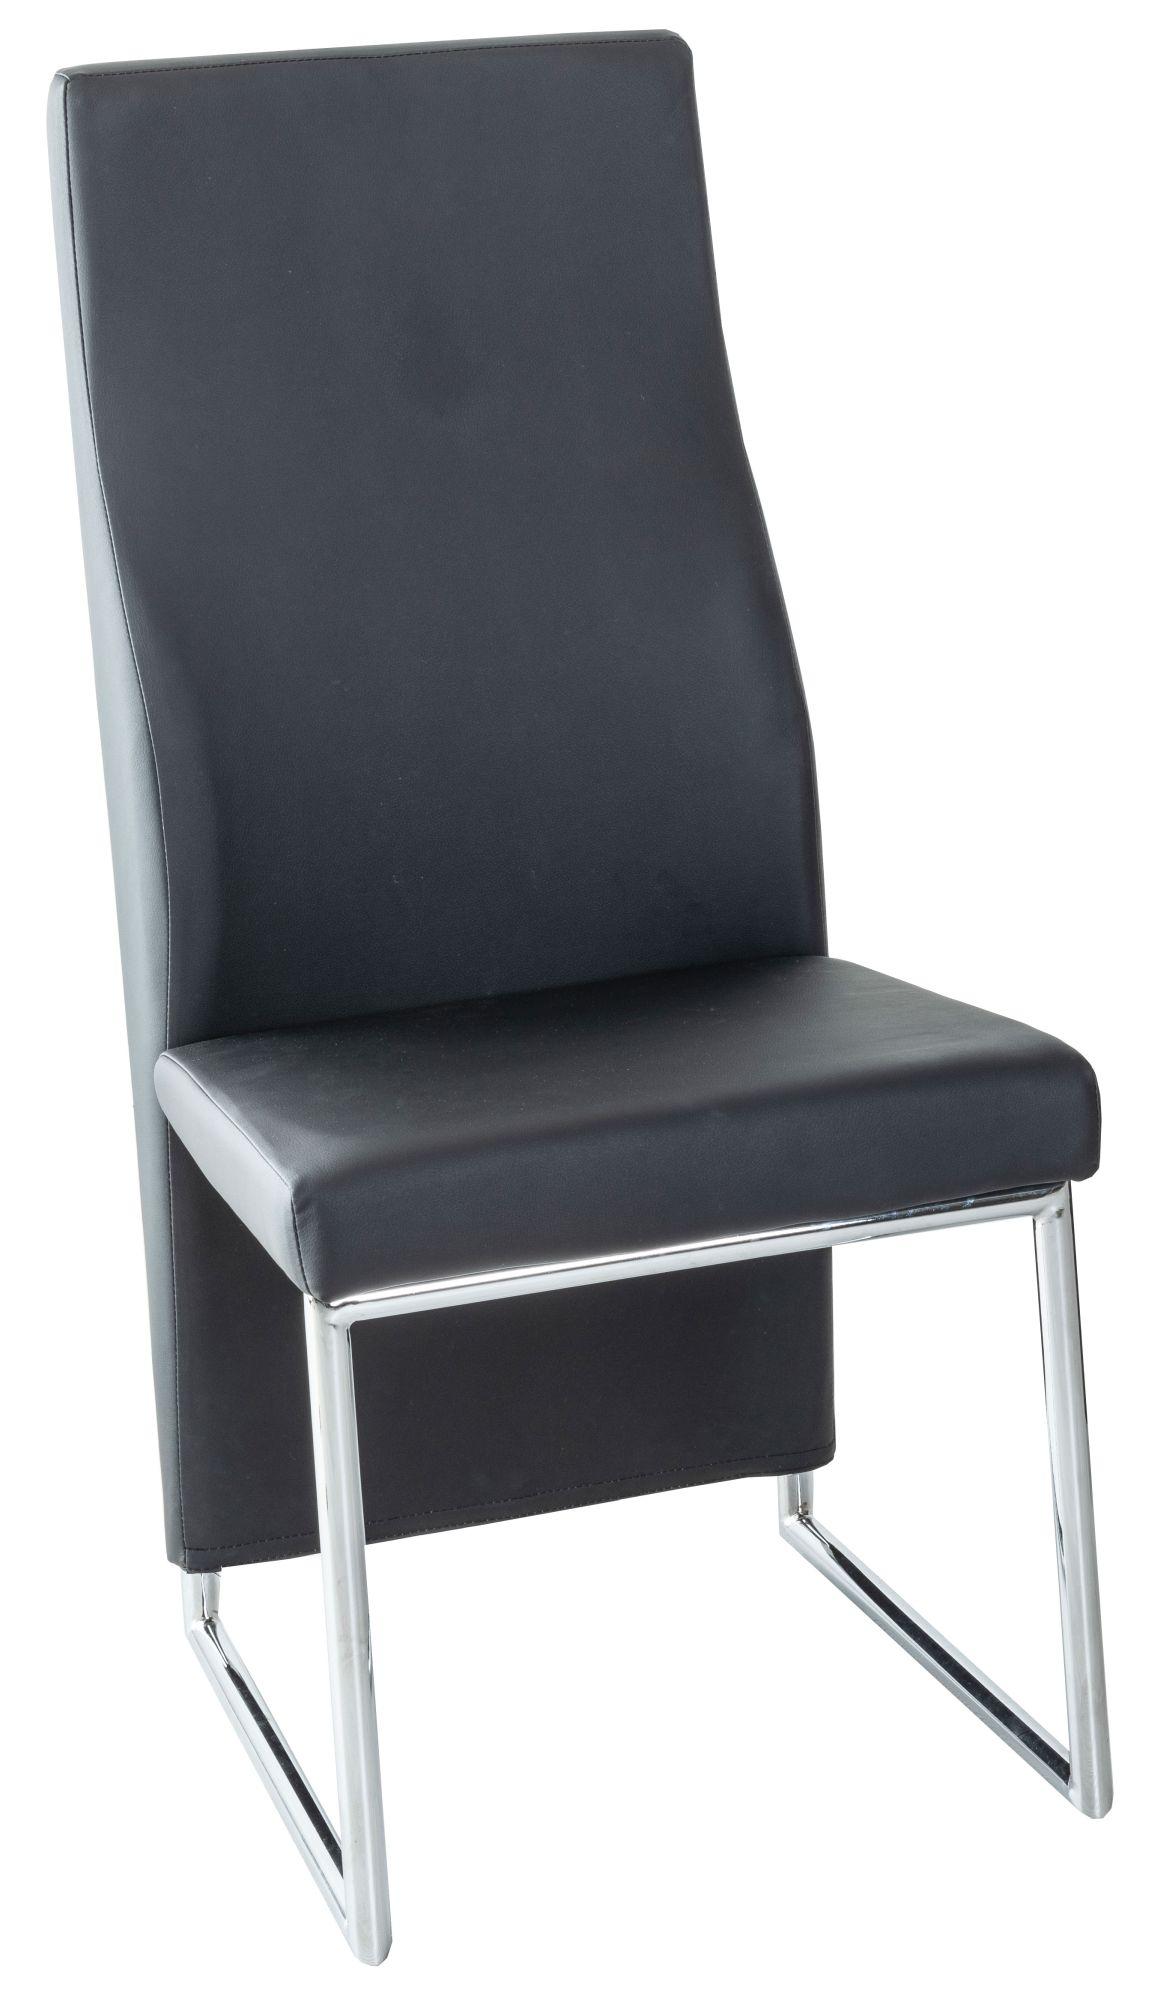 Perth Black Dining Chair, Leather - Faux PU with High Back and Stainless Steel Chrome Base